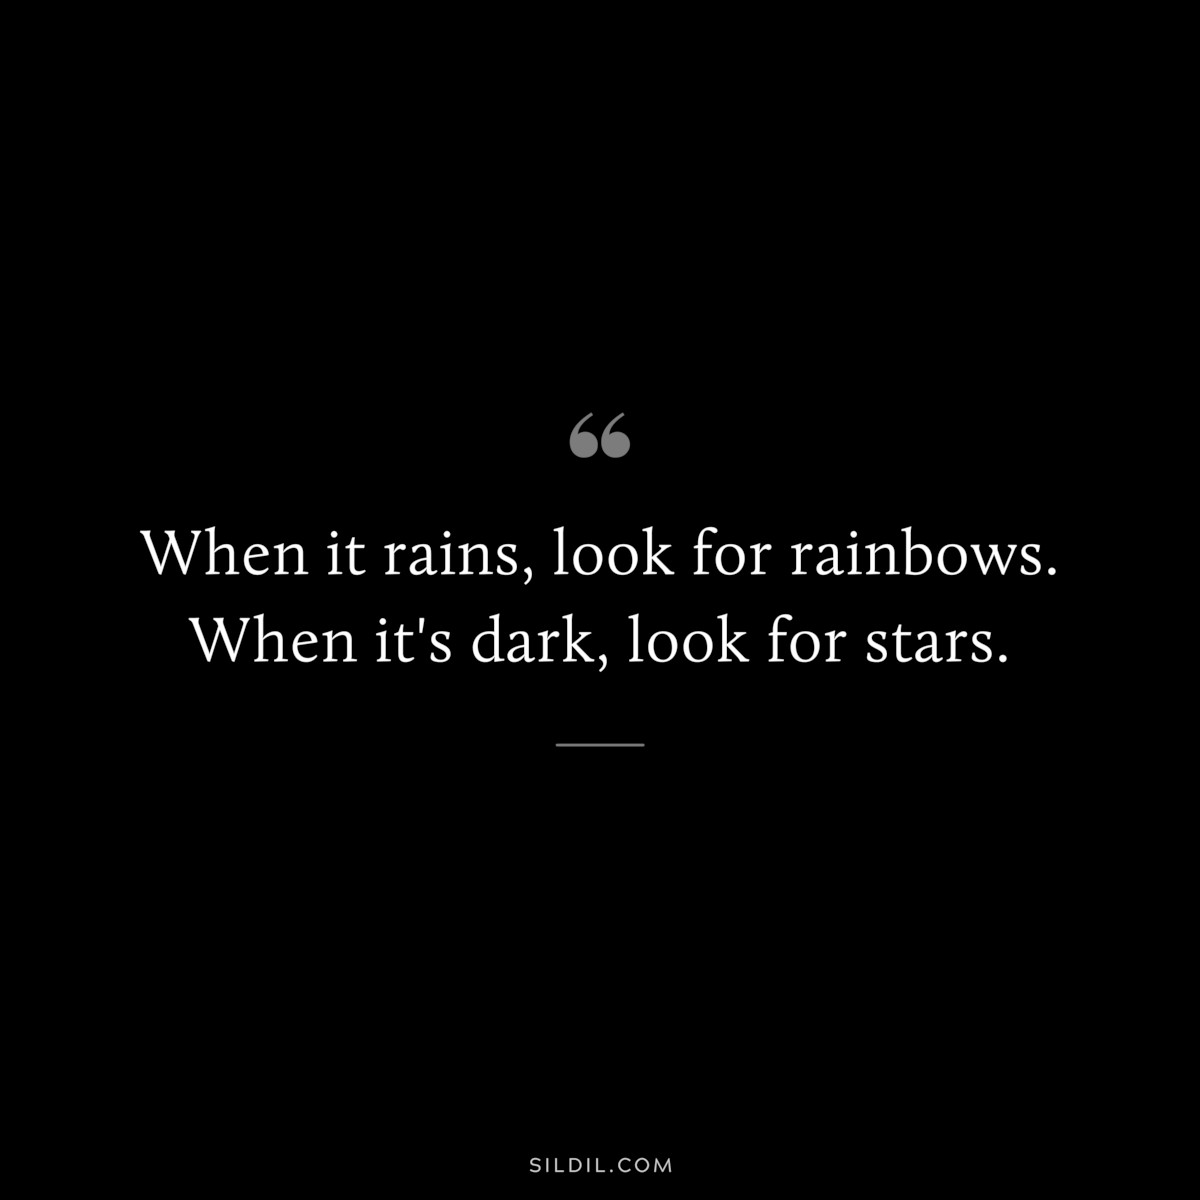 When it rains, look for rainbows. When it's dark, look for stars.